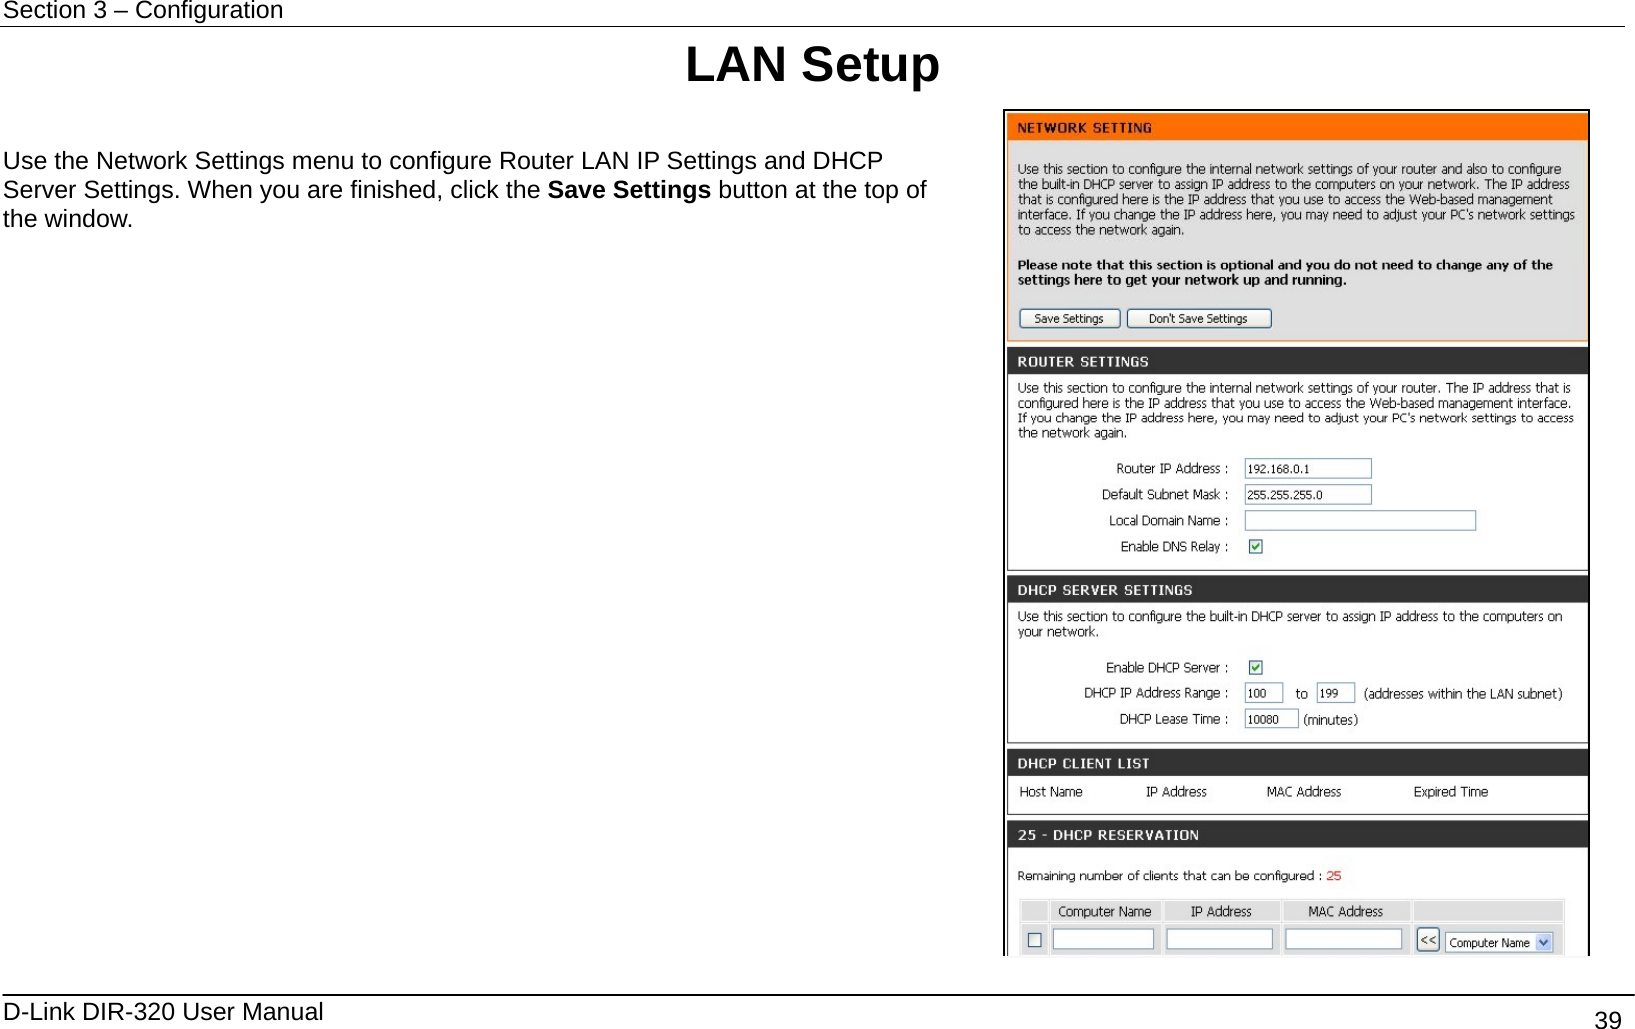 Section 3 – Configuration   D-Link DIR-320 User Manual                                       39 LAN Setup  Use the Network Settings menu to configure Router LAN IP Settings and DHCP Server Settings. When you are finished, click the Save Settings button at the top of the window.     